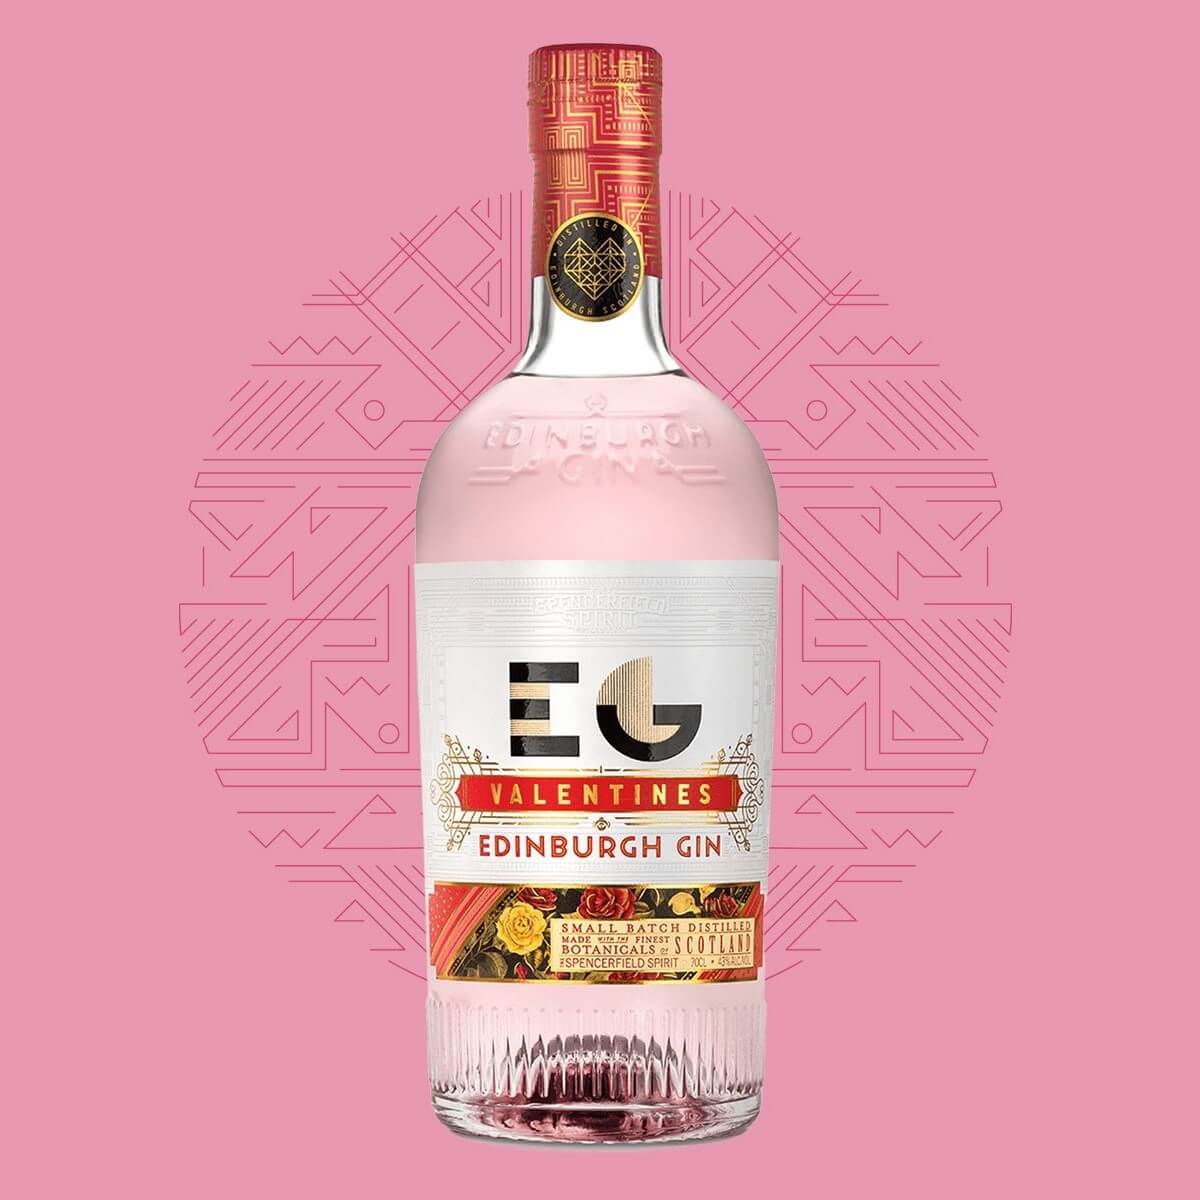 Image of Edinburgh Valentine's Gin made in the UK by Edinburgh Gin. Buying this product supports a UK business, jobs and the local community